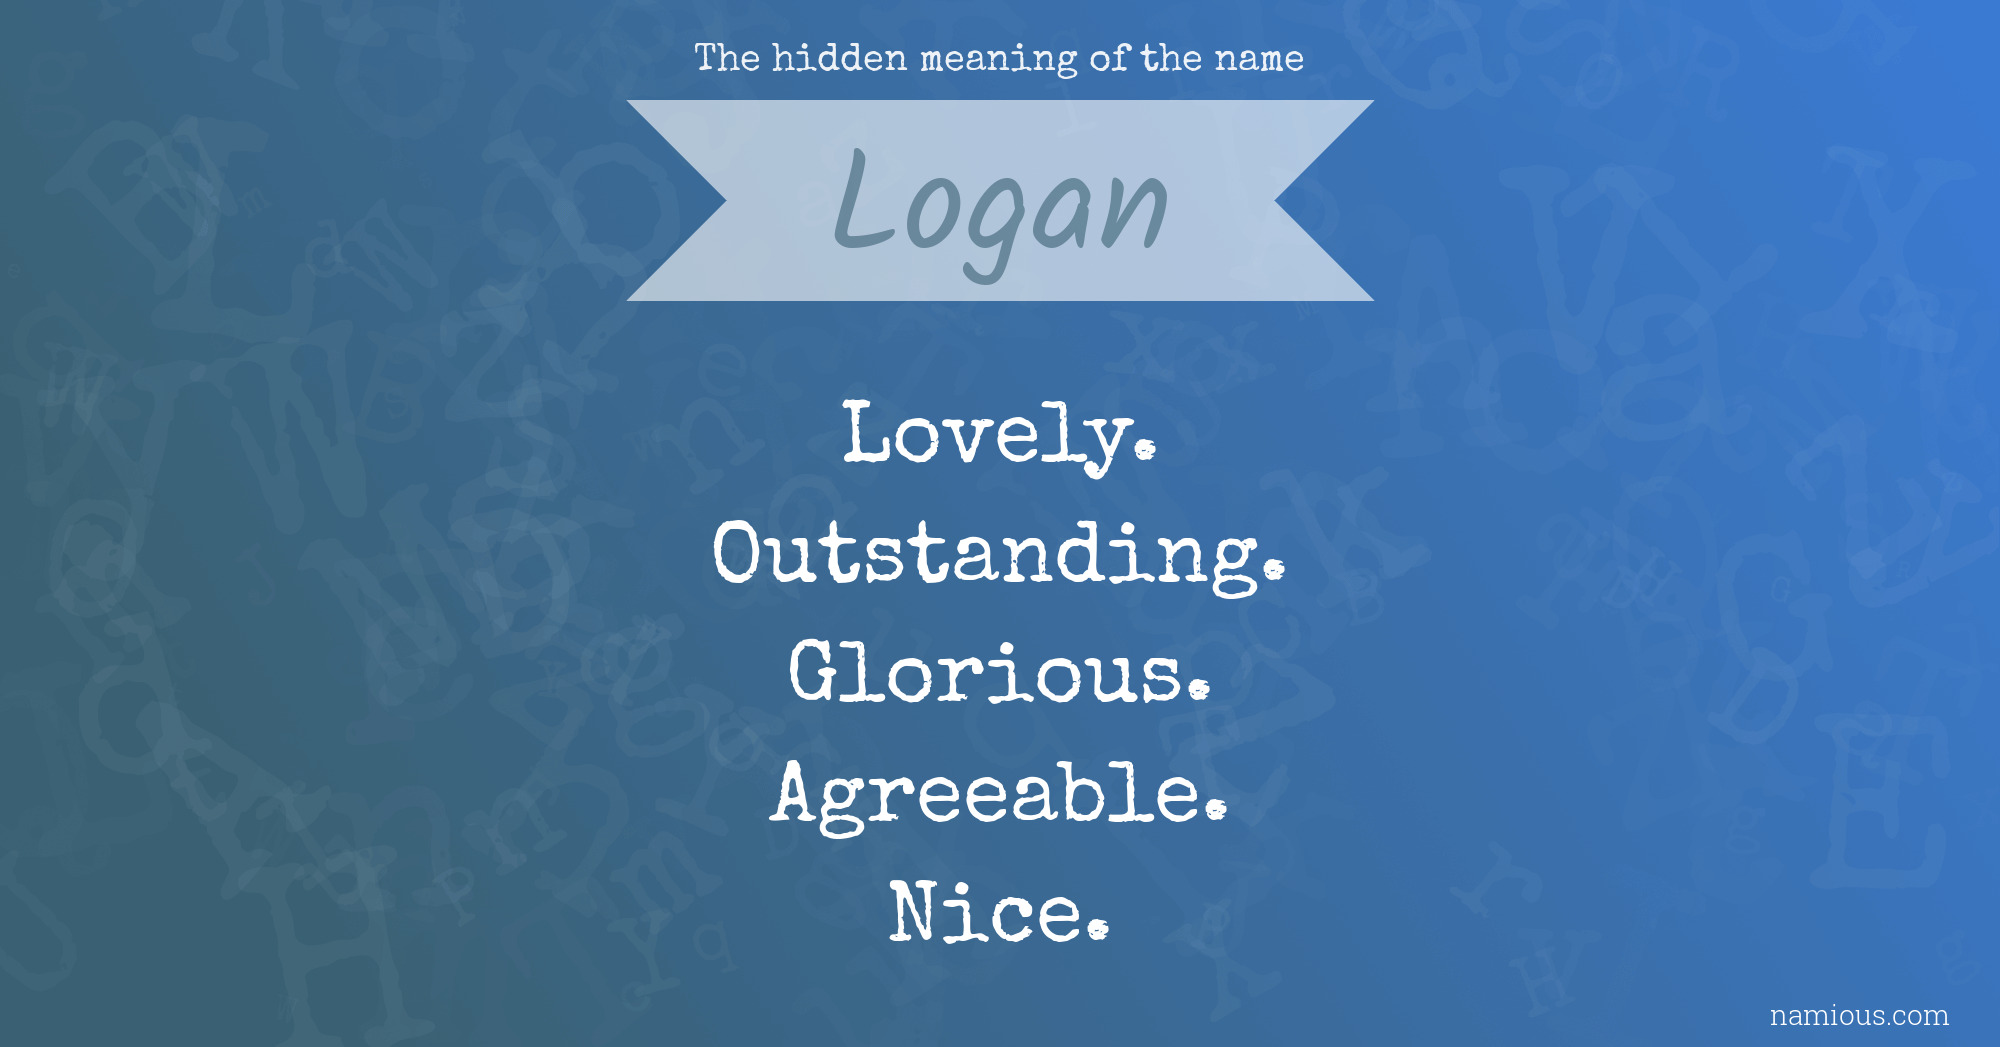 The hidden meaning of the name Logan